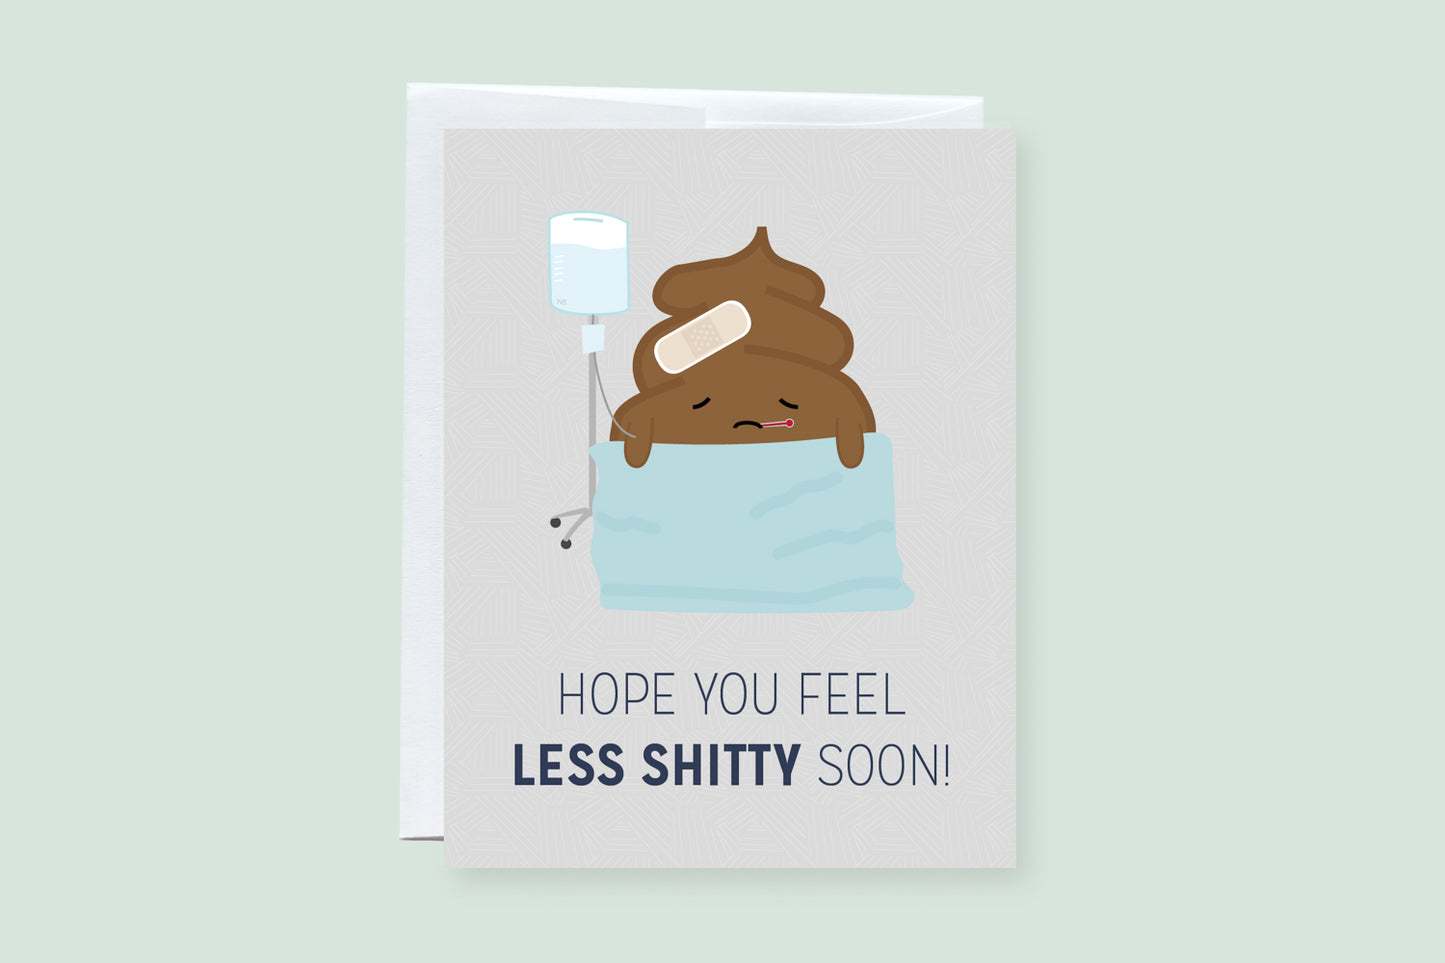 Hope You Feel Less Shitty Soon - Punny Greeting Card